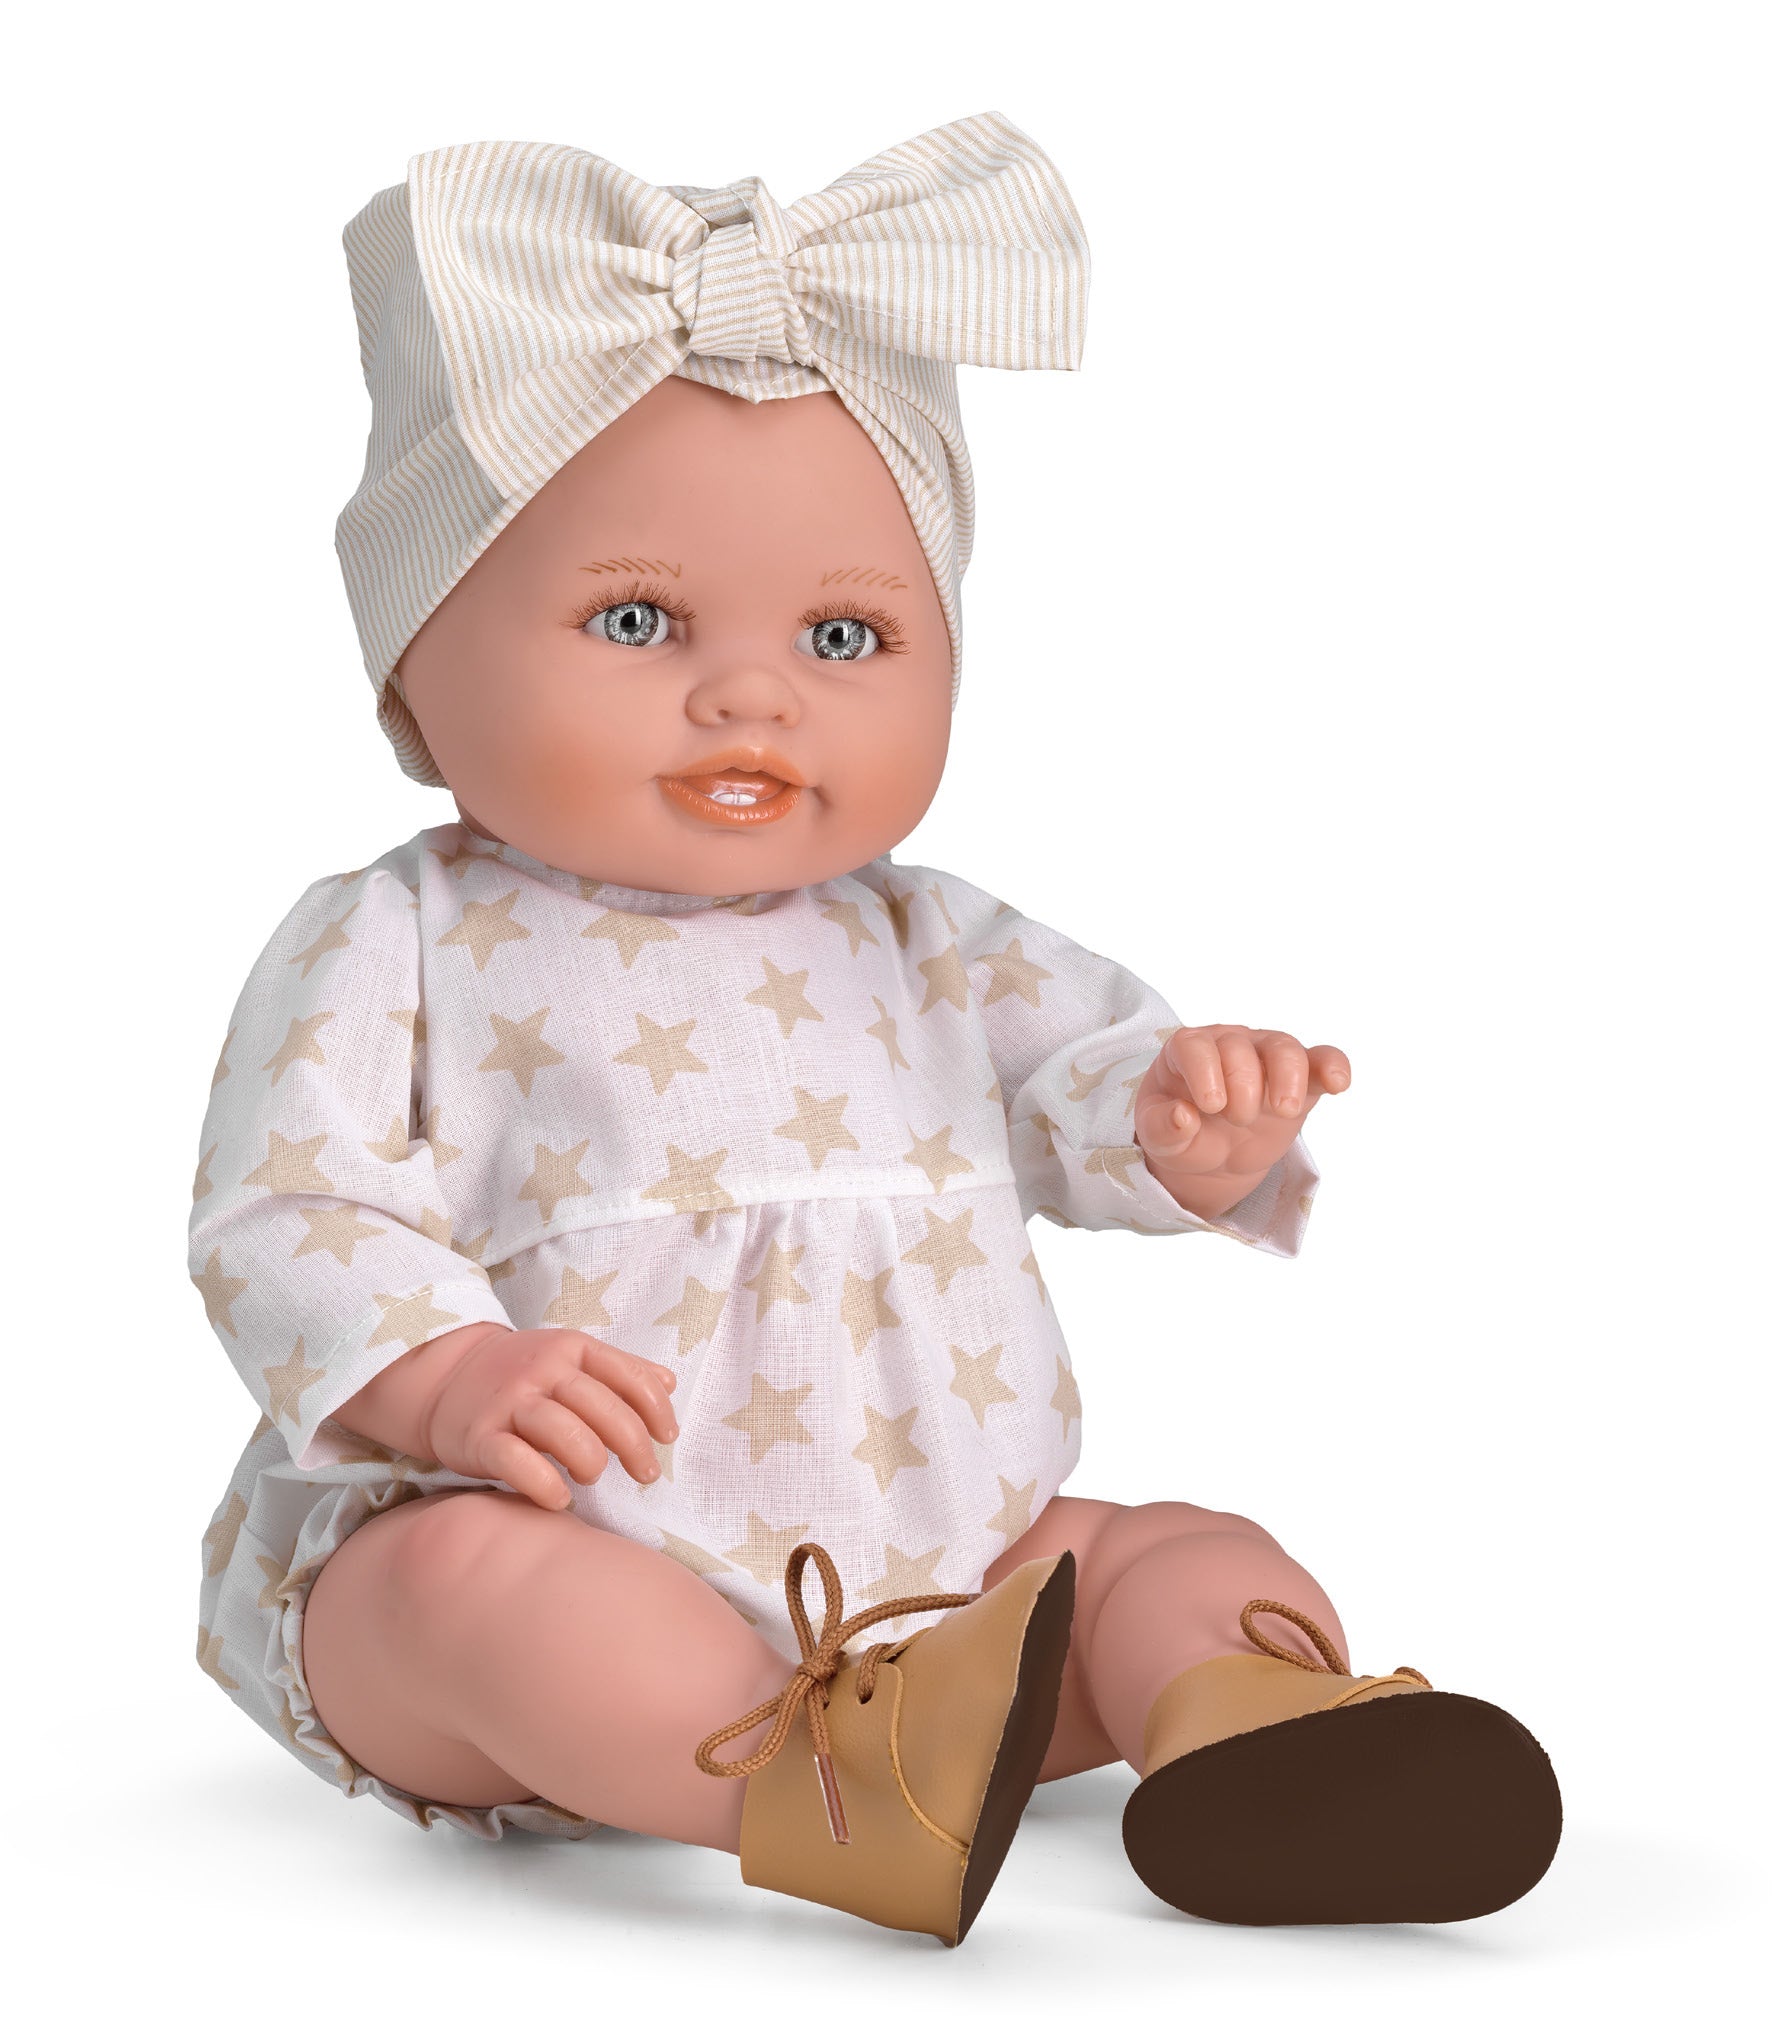 Handcrafted Daniela Collection Magic Baby Doll (46709) by LAMAGIK